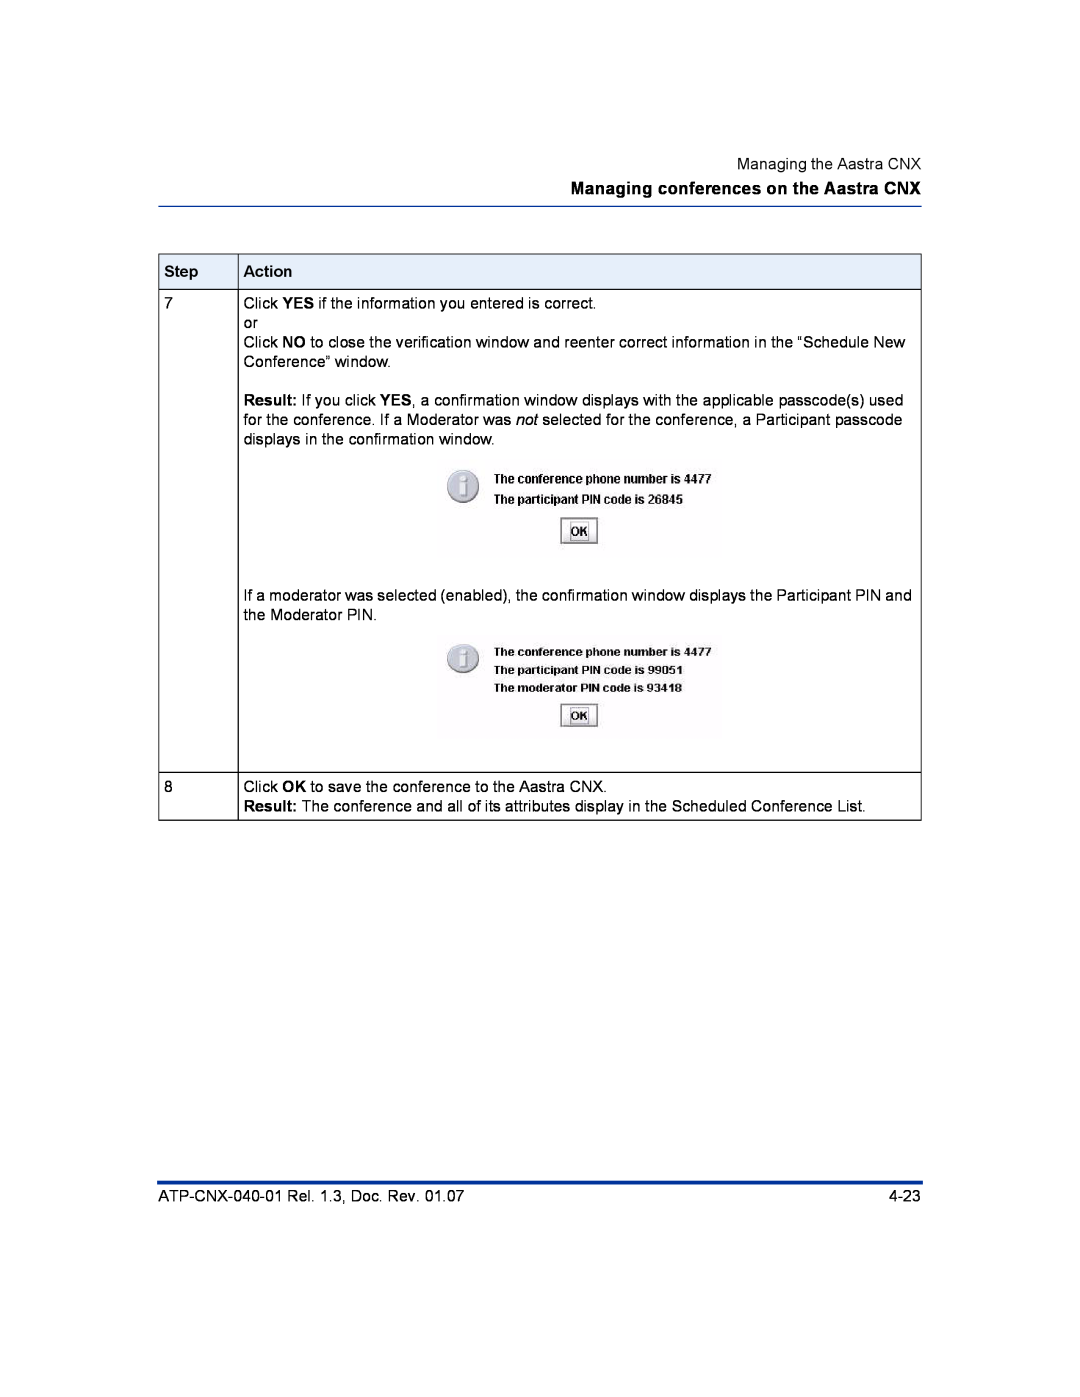 Aastra Telecom ATP-CNX-040-01 manual Managing conferences on the Aastra CNX, Step, Action 